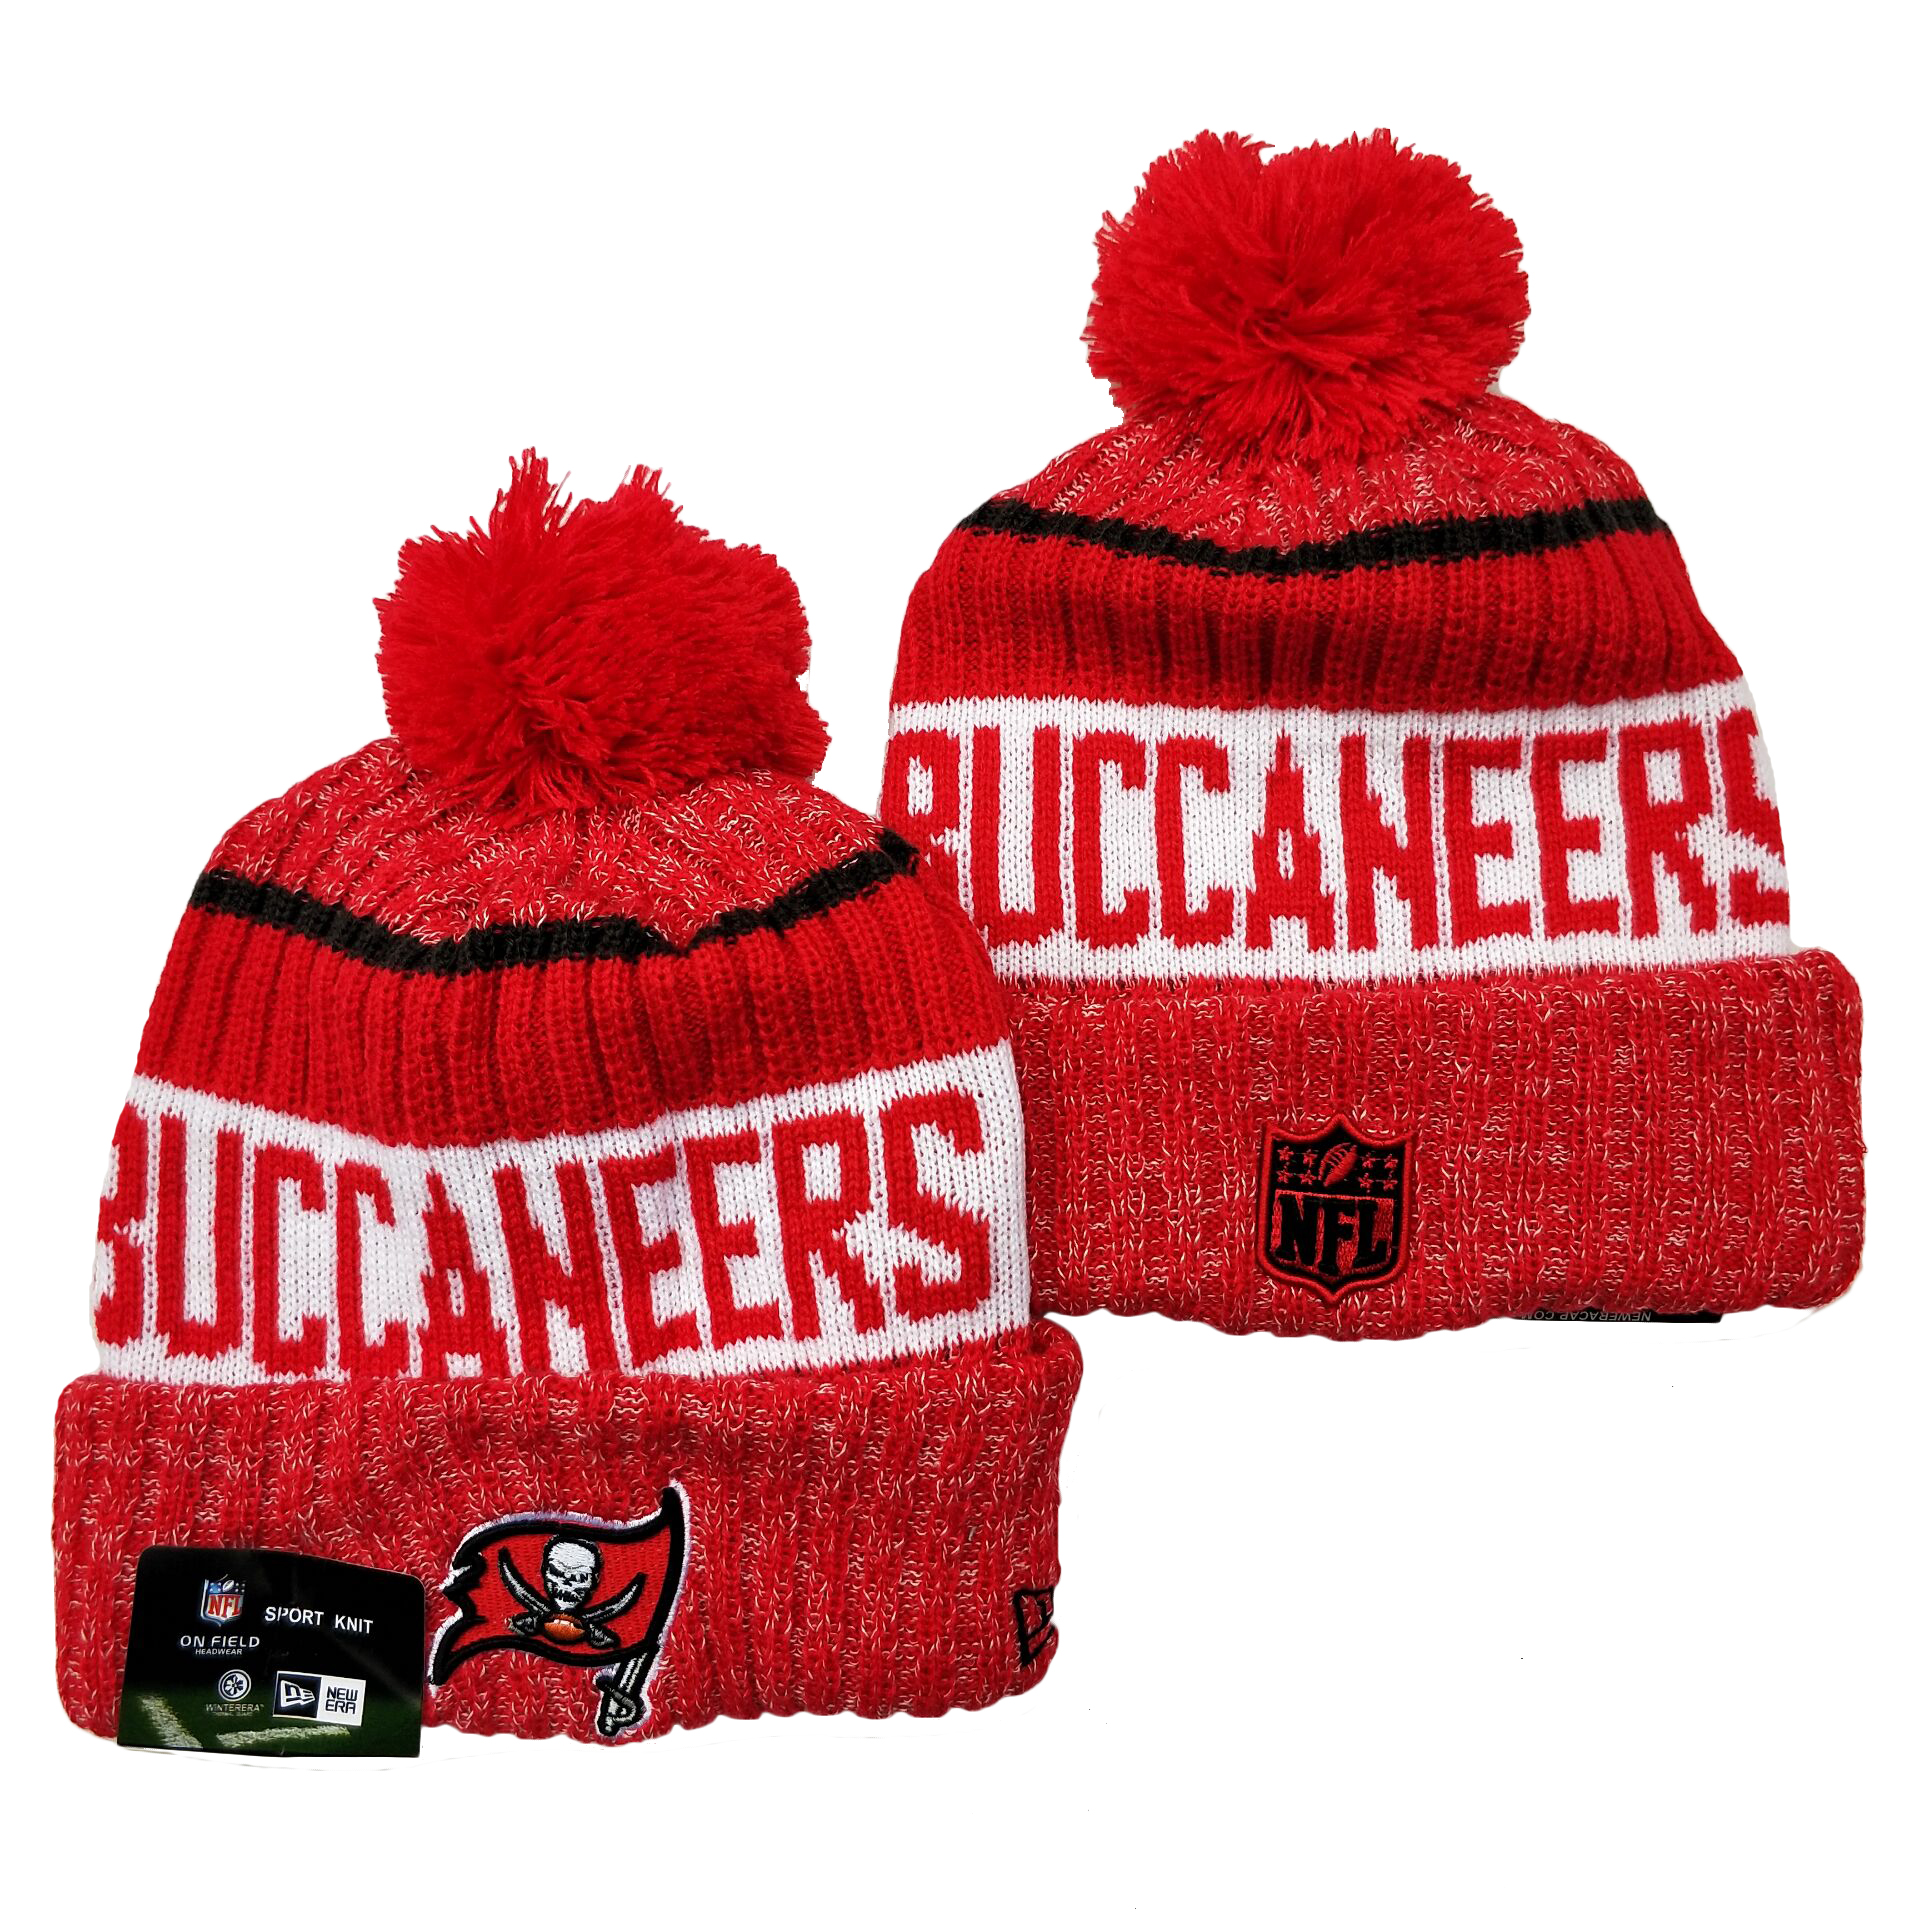 Tampa Bay Buccaneers 2021 Knit Hats 004